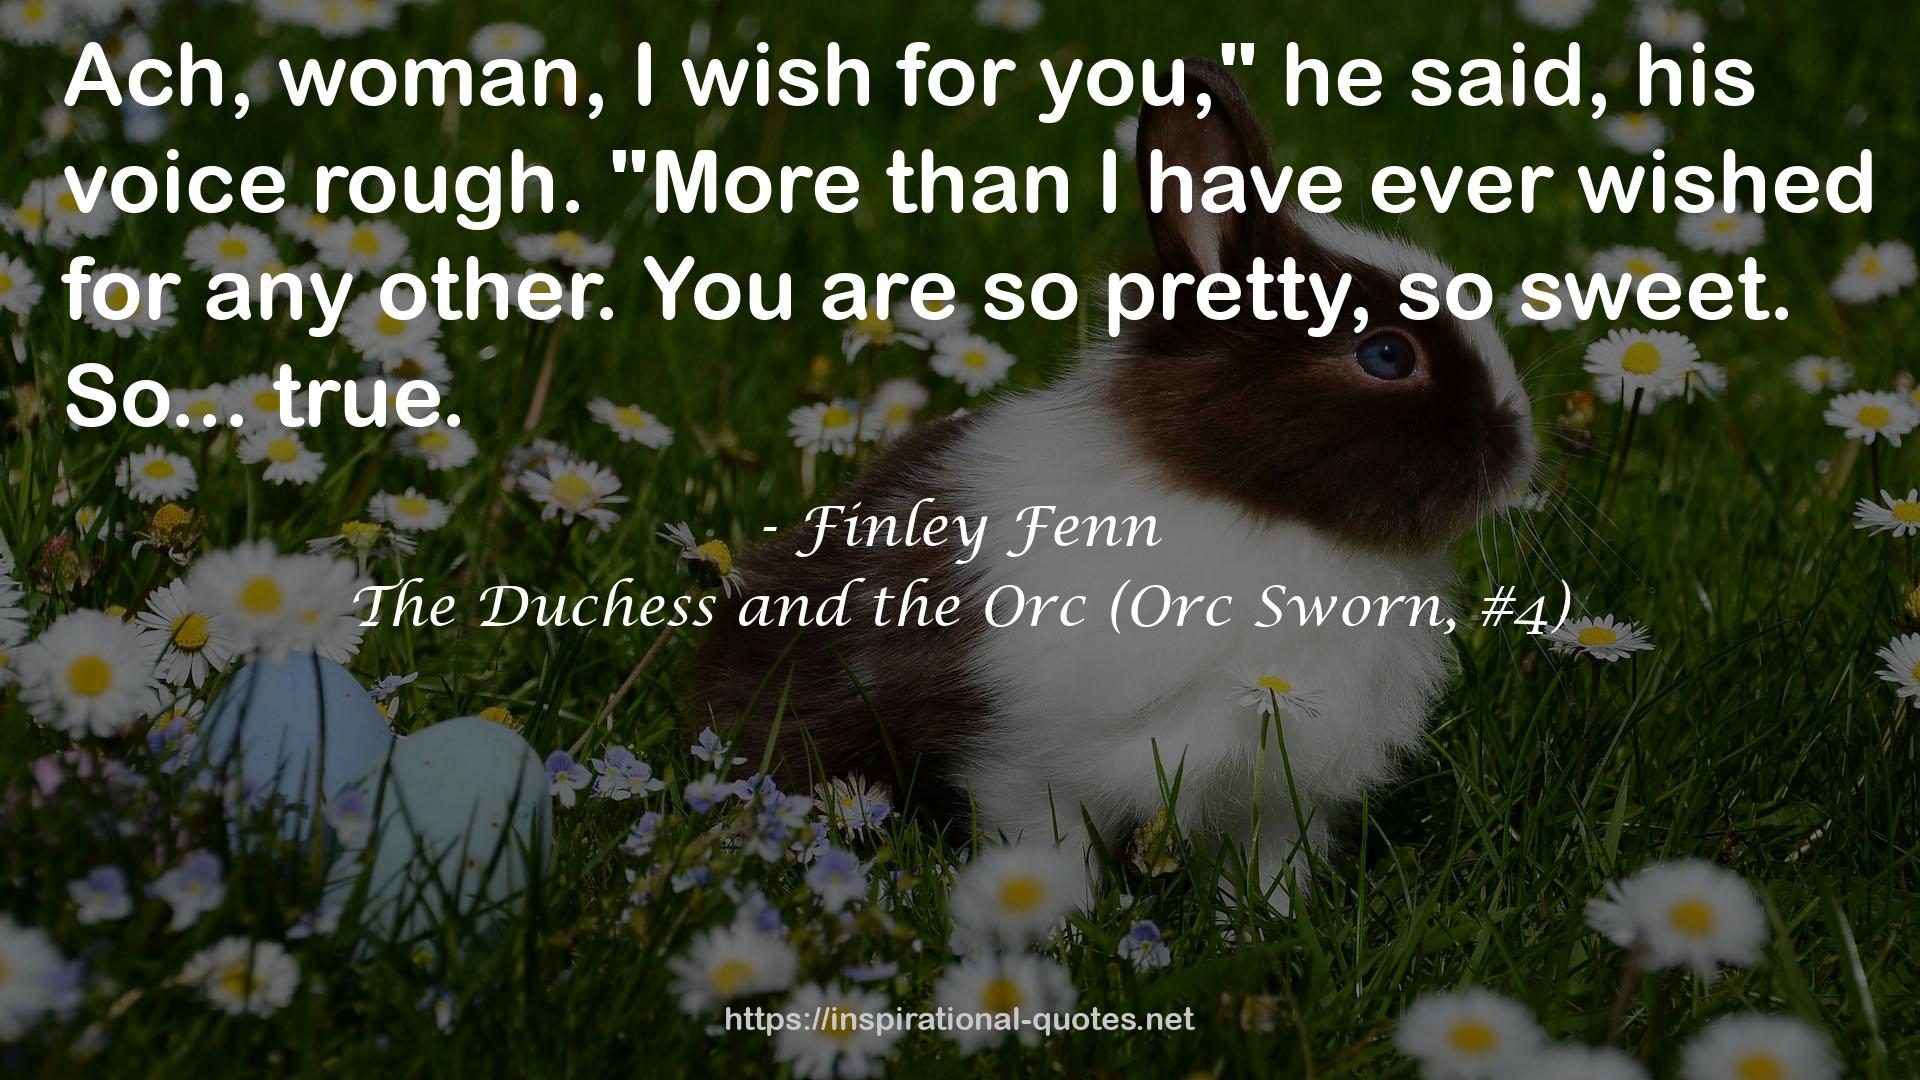 The Duchess and the Orc (Orc Sworn, #4) QUOTES